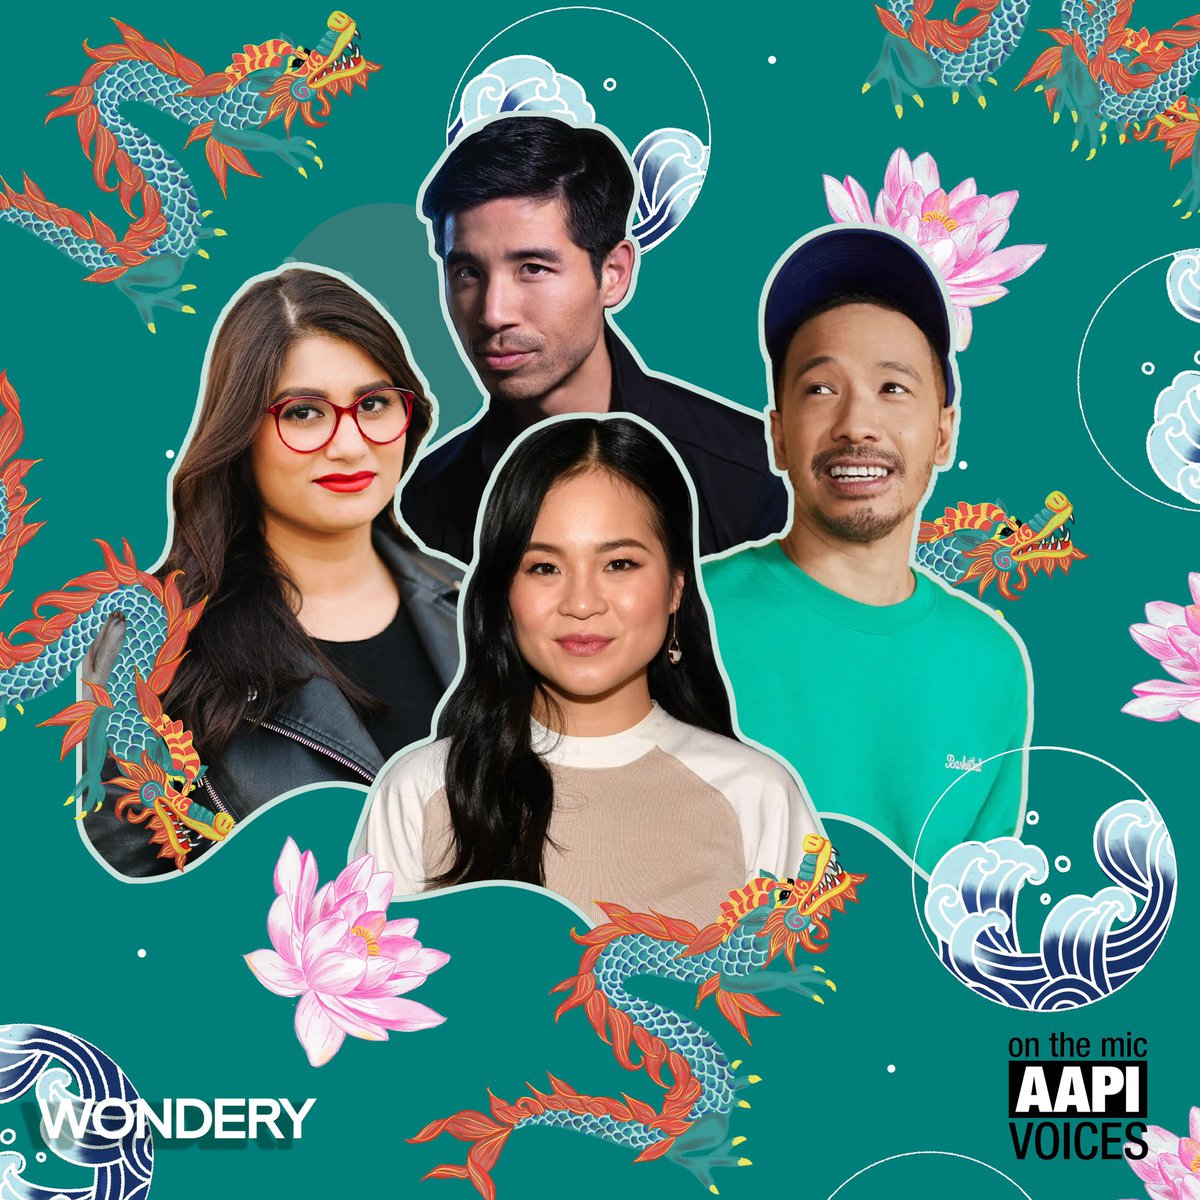 May 1st brings in the start of AAPI Heritage Month! What better way to celebrate than checking out a new podcast or two. Which one are you listening to first? #AAPIVoices #AAPIHeritageMonth